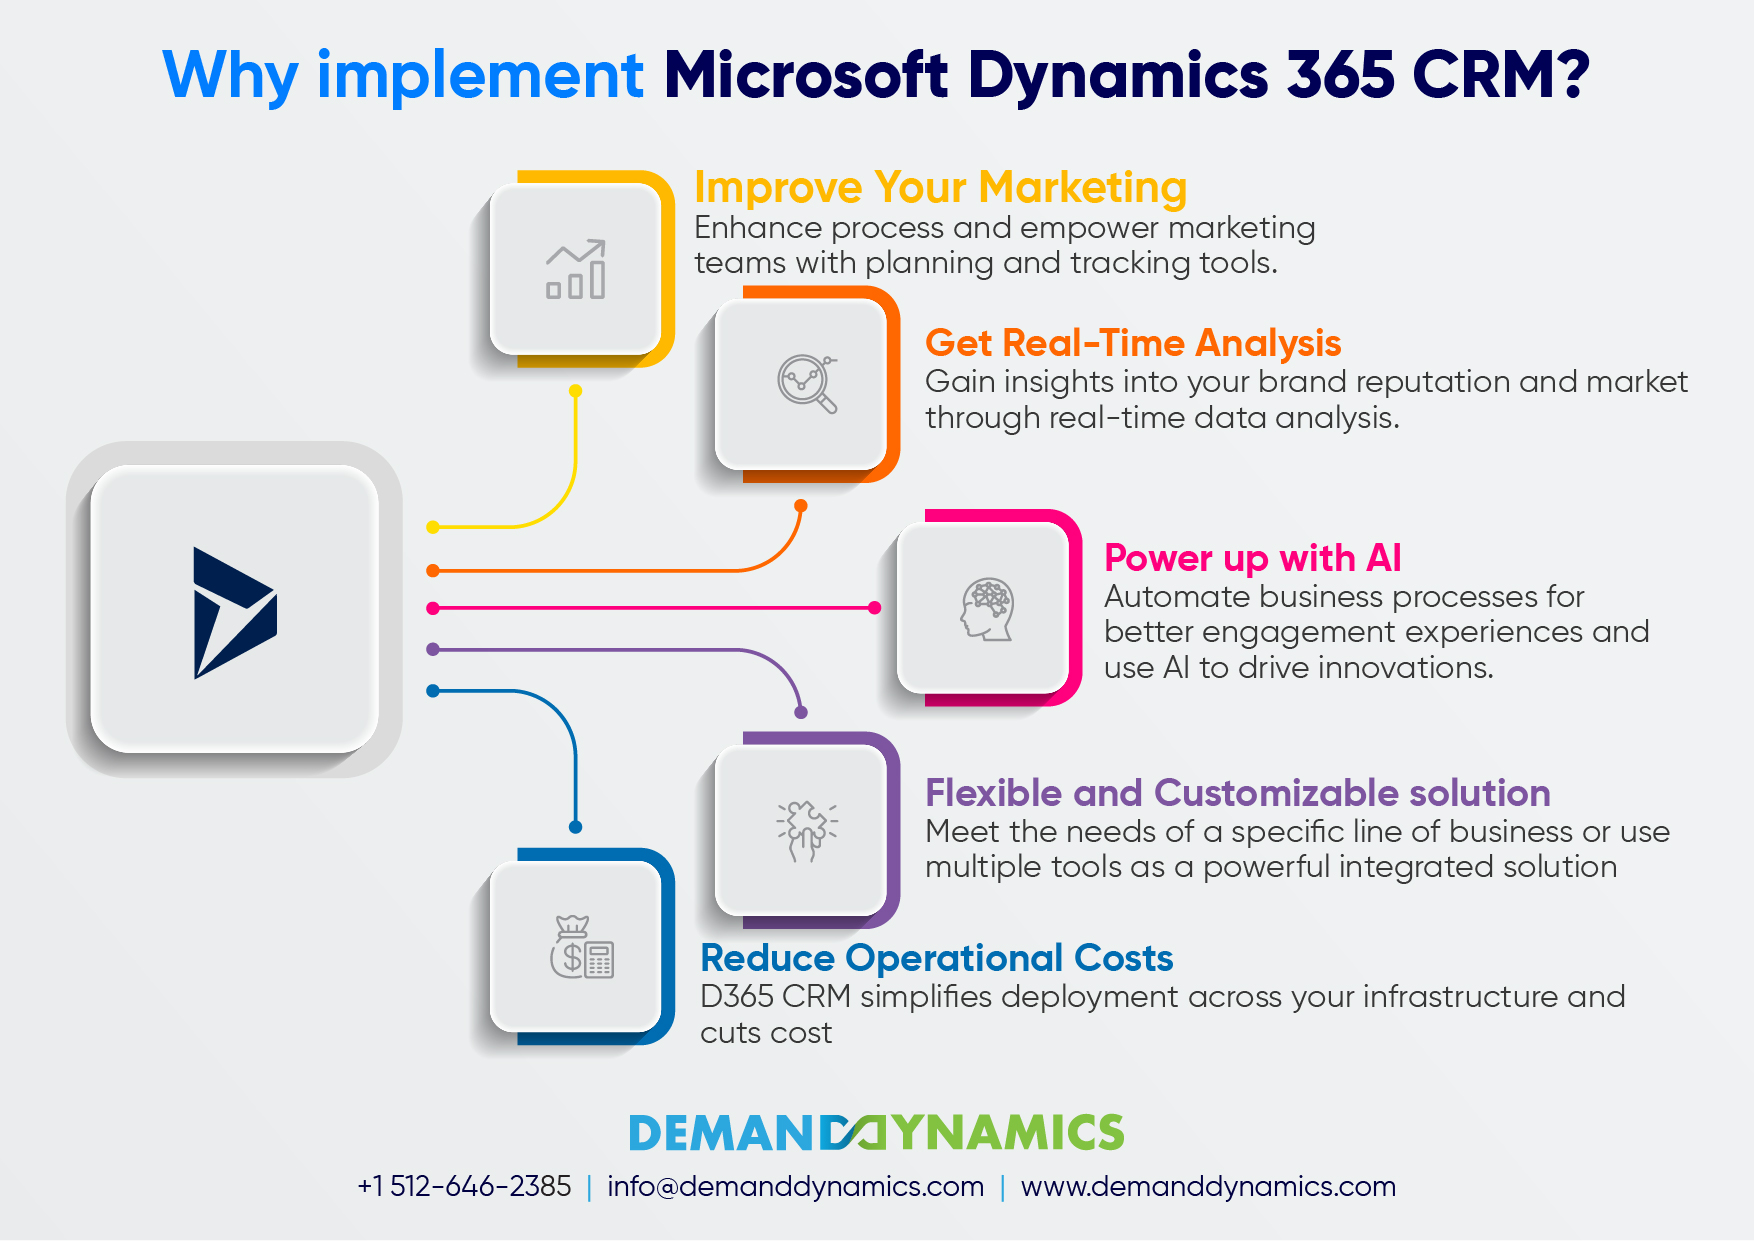 Choose the right Microsoft Dynamics 365 Solution suits your business?